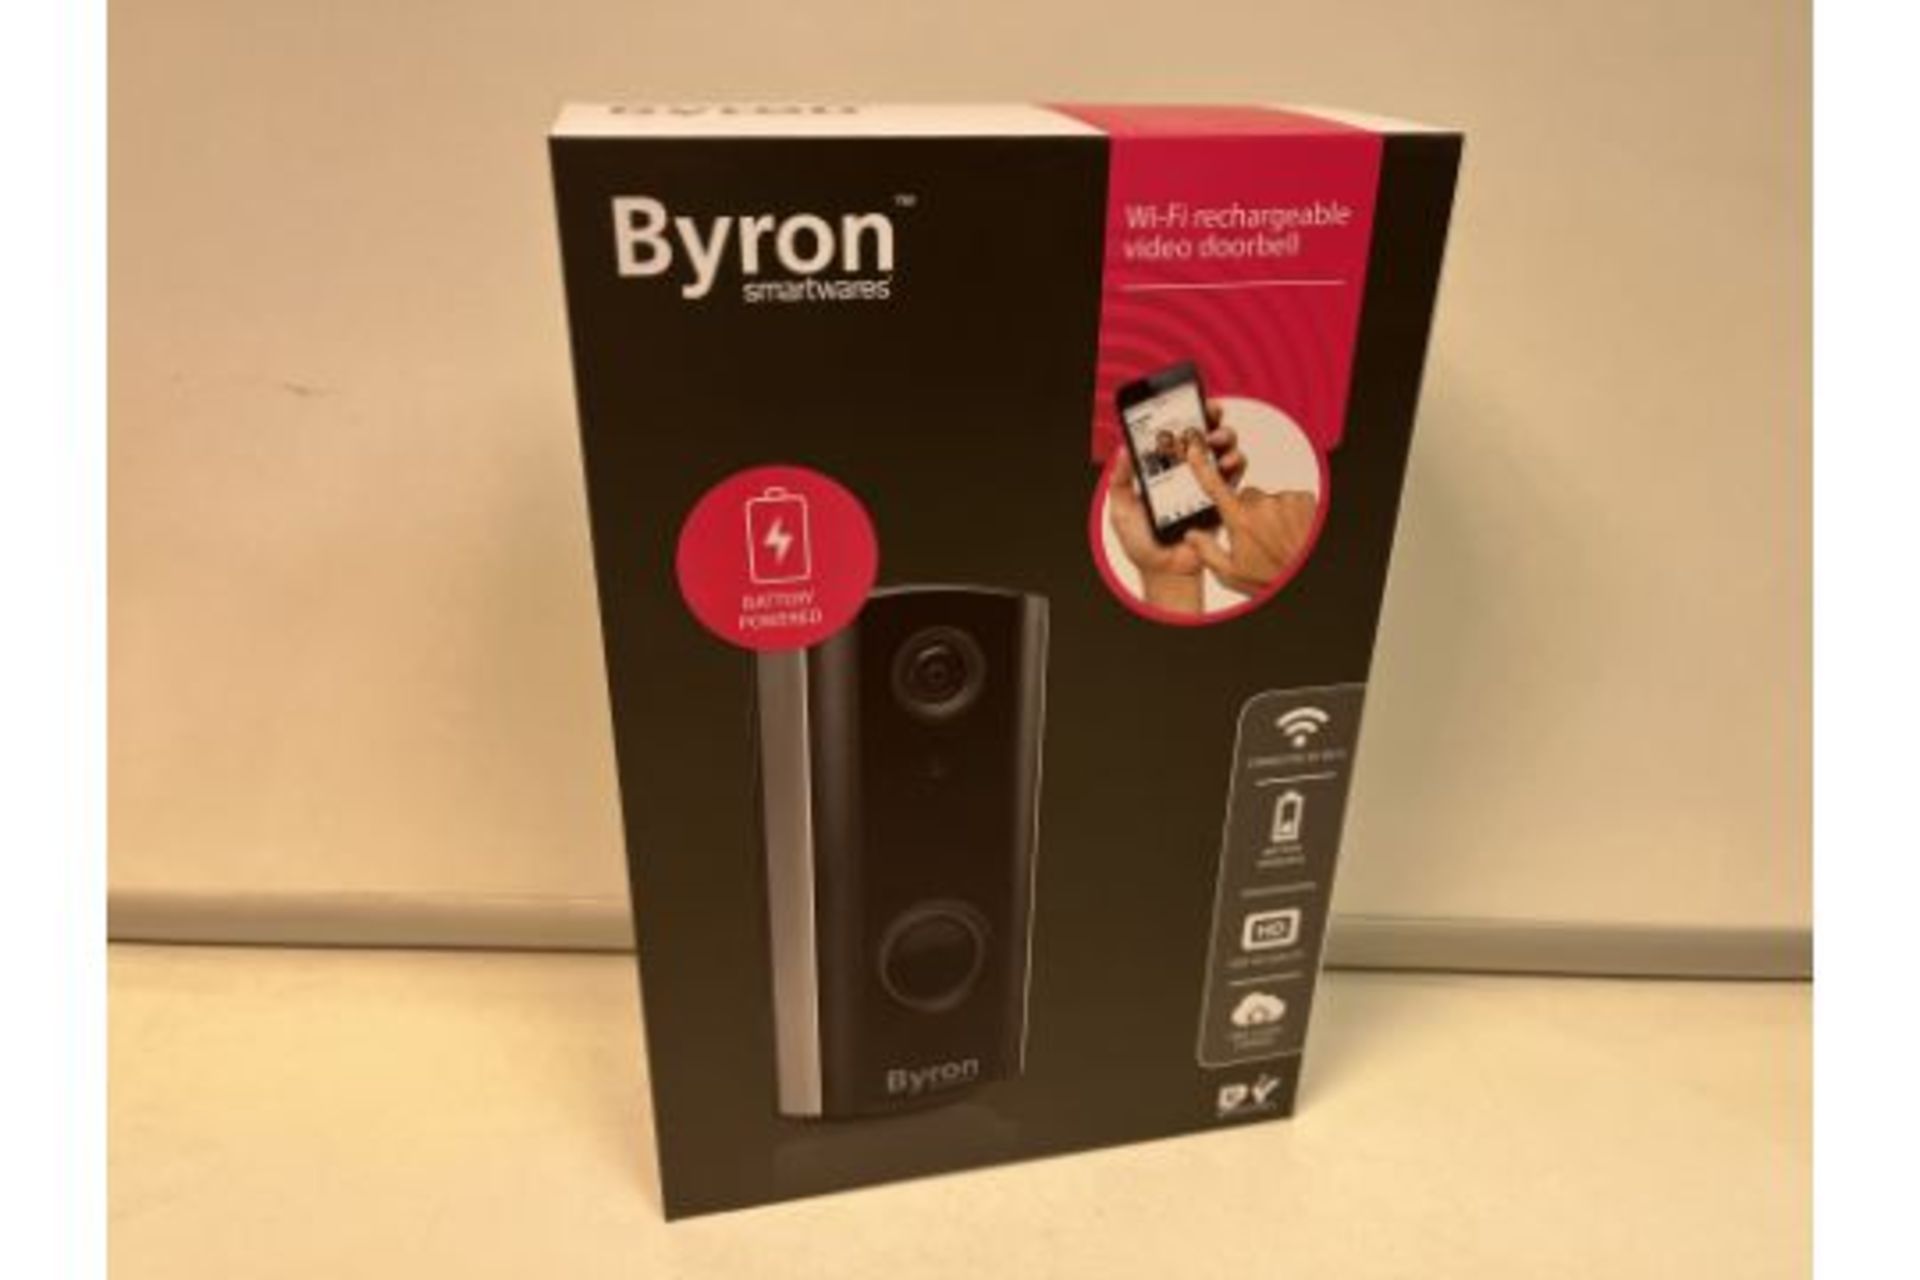 BRAND NEW BYRON SMARTWARES WI-FI RECHARGEABLE VIDEO DOORBELL R8